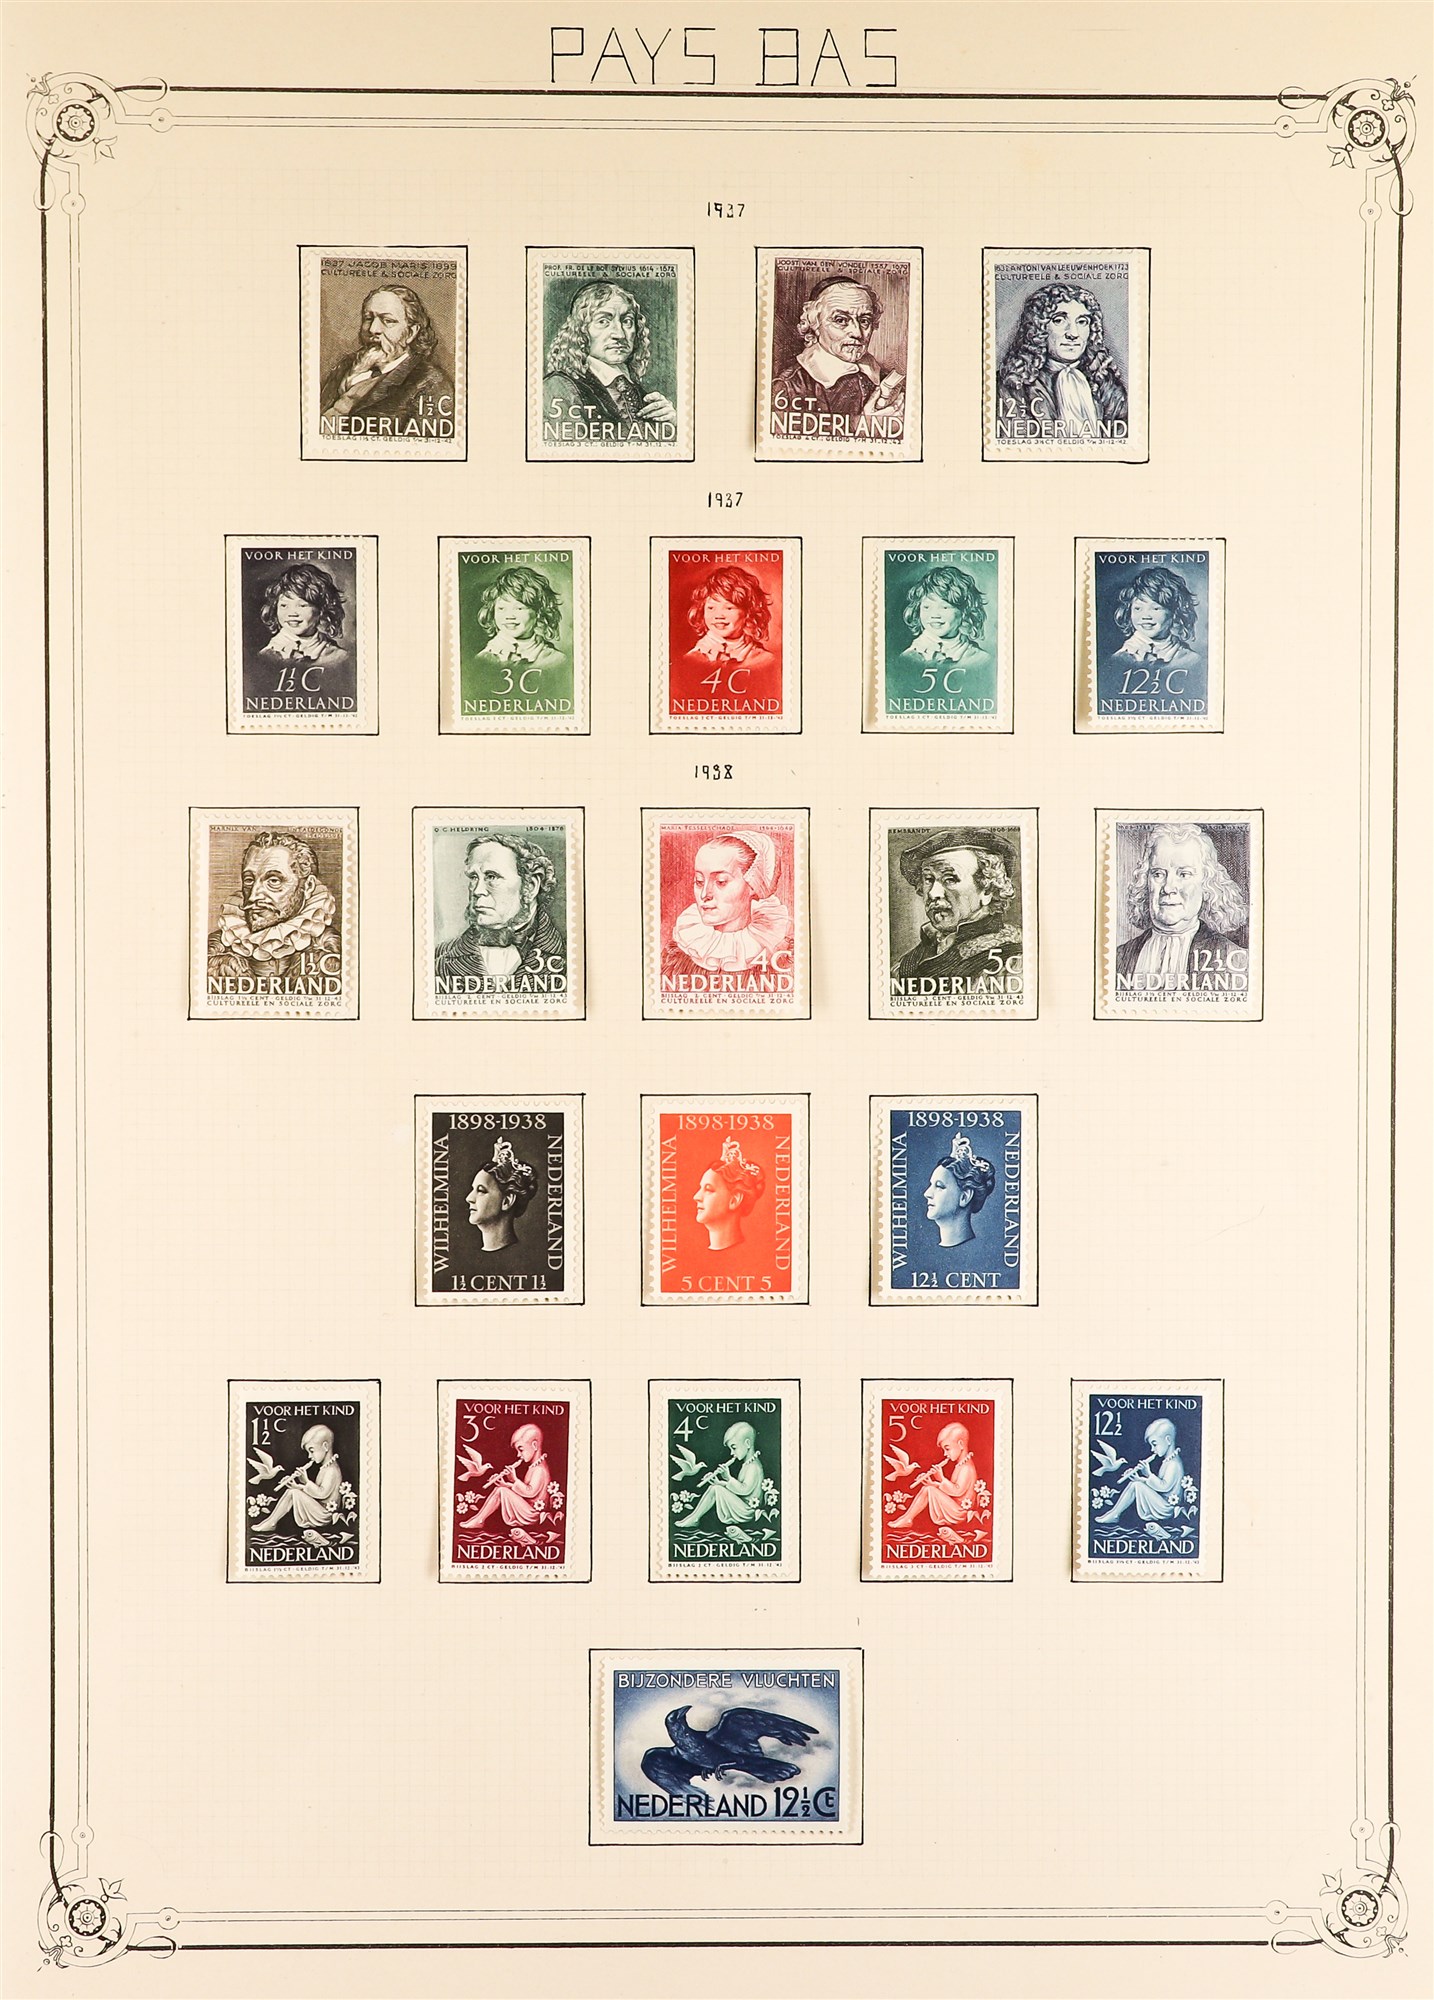 NETHERLANDS 1921 - 1939 MINT SETS collection on album pages, Michel €3000+ (110+ stamps) - Image 6 of 6